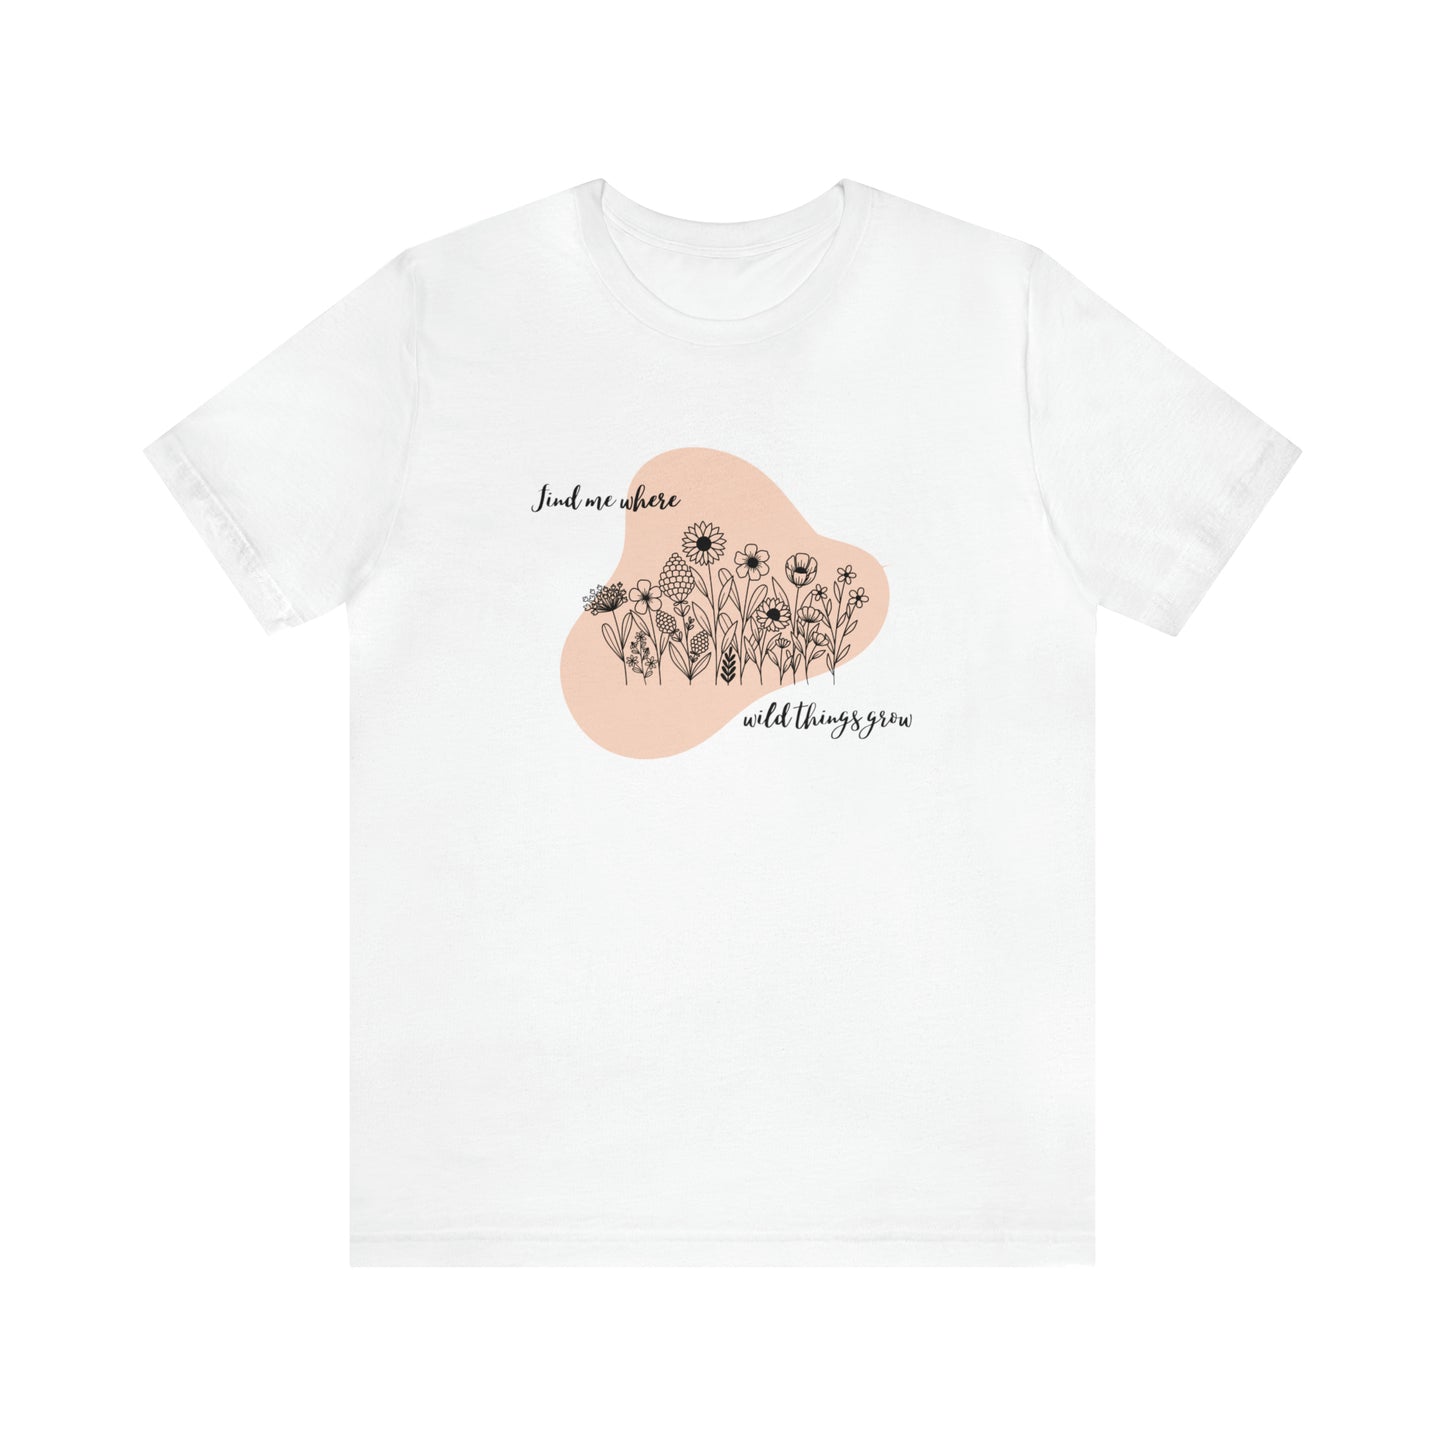 Find Me Where Wild Things Grow Graphic Tee